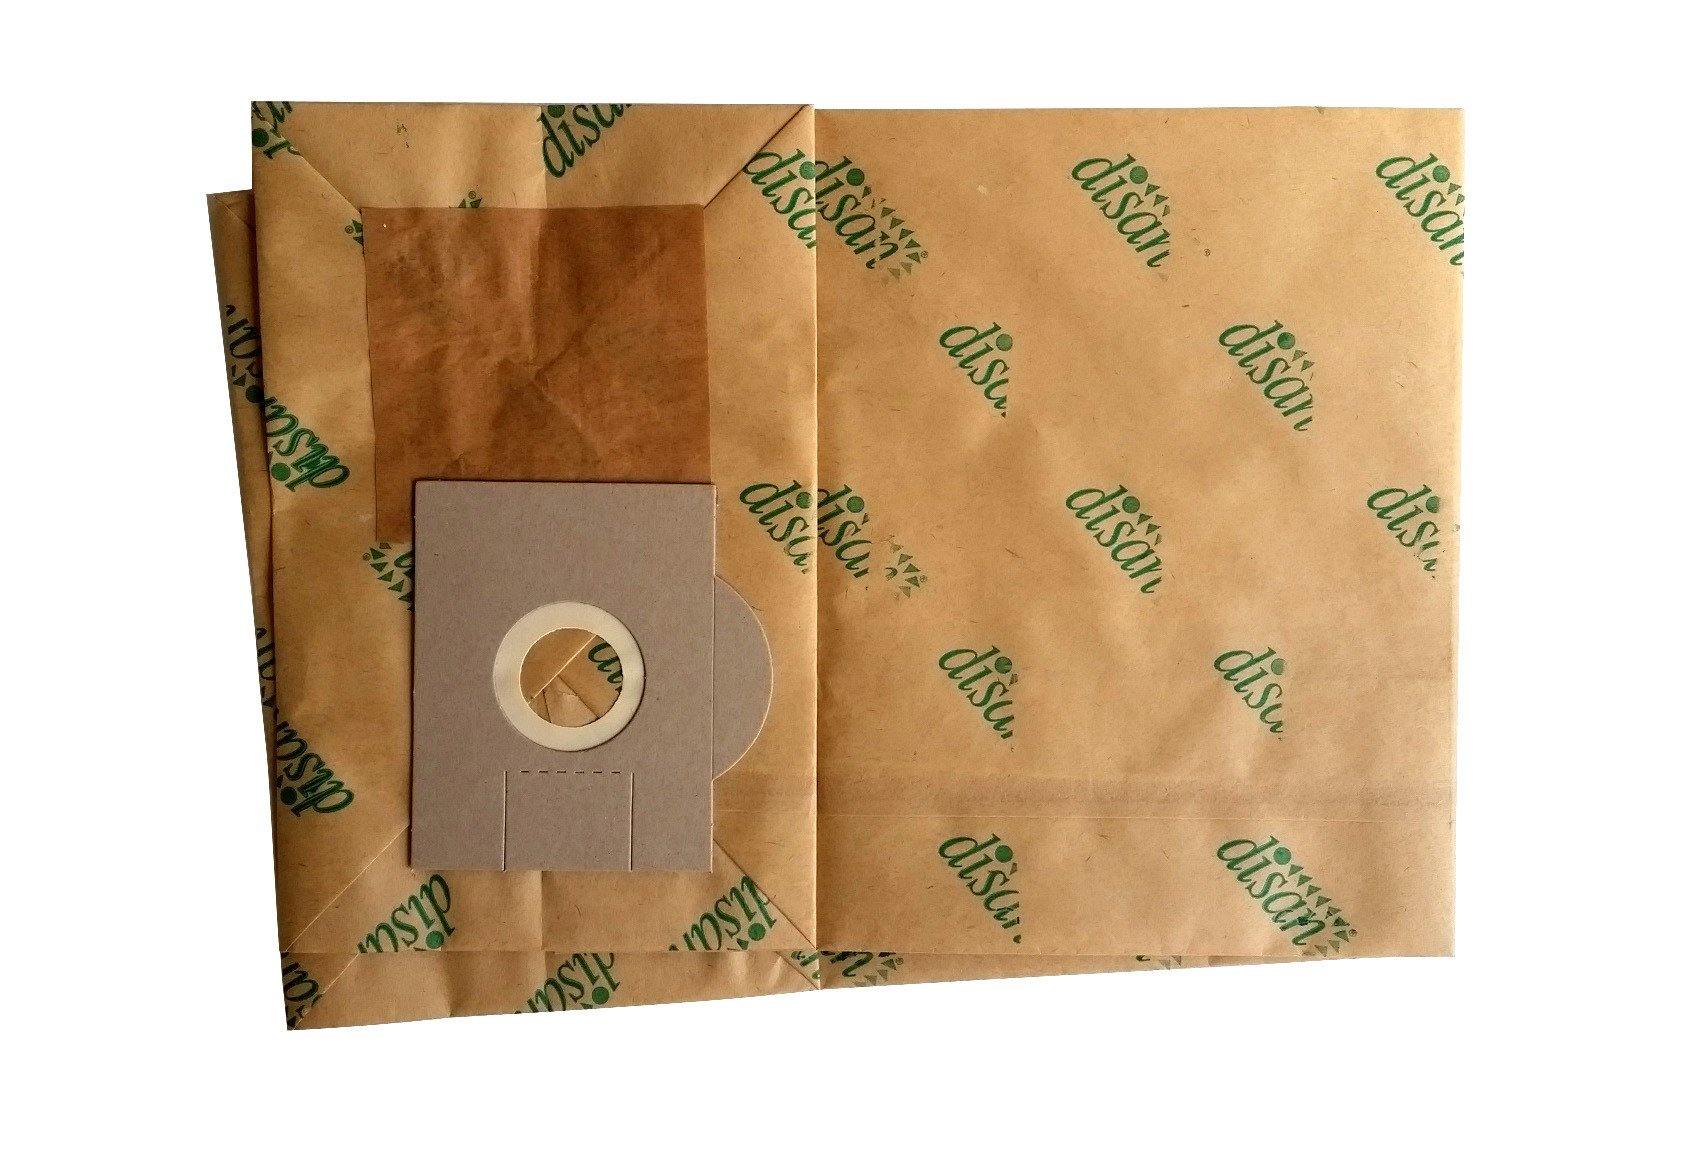 Paper Filter Bag for Matrix | Disan - 2 Pack - AstroVac Ducted Vacuum Warehouse